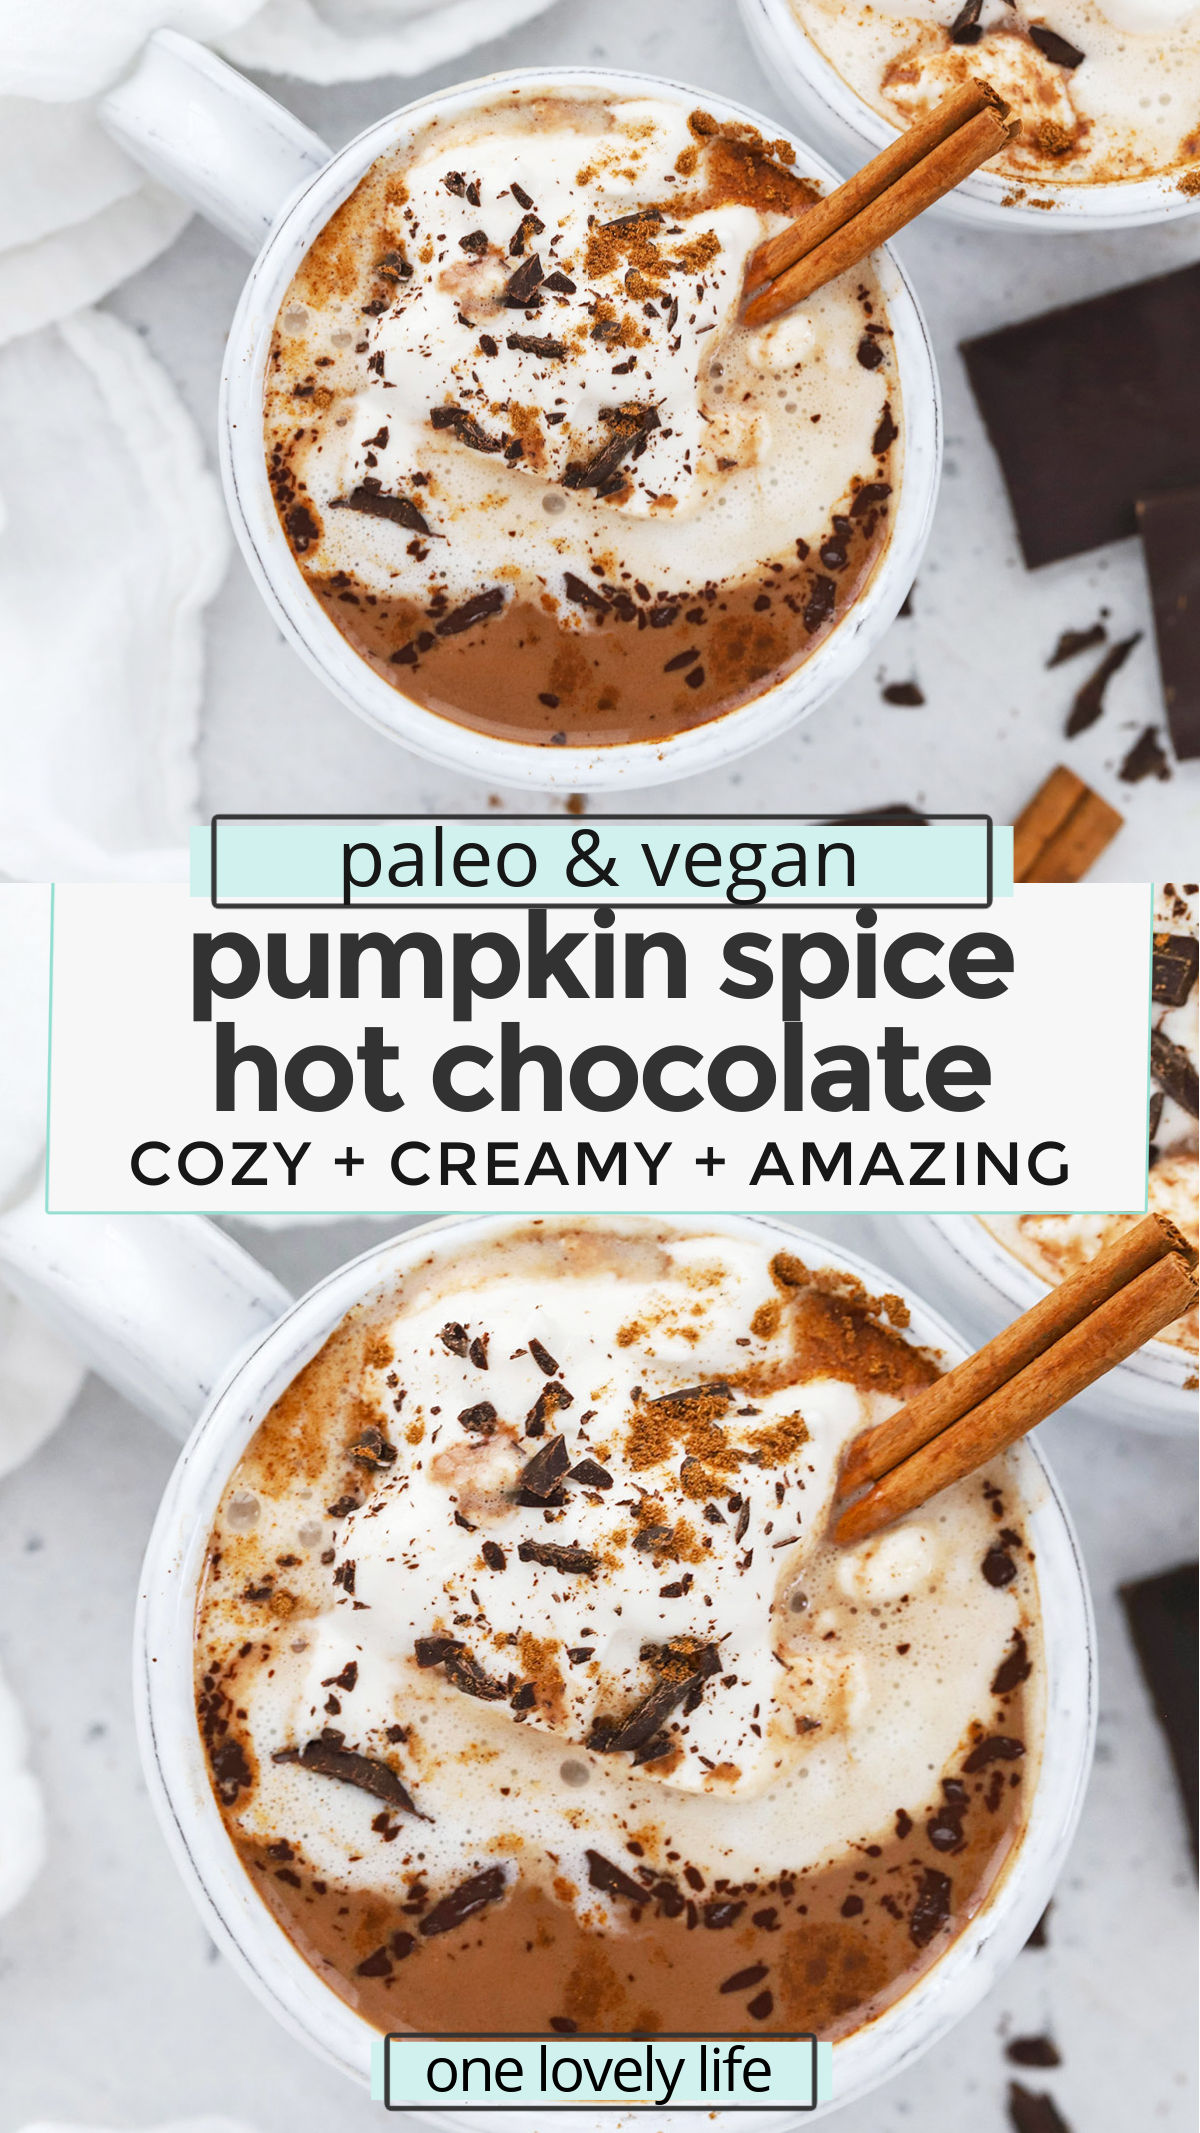 Vegan Pumpkin Spice Hot Chocolate - This dairy-free pumpkin spice hot chocolate is the perfect drink to cozy up with during cold weather. You'll love the rich, chocolatey flavor and warm kiss of spice. (Paleo-Friendly) // Pumpkin Spice Hot Cocoa Recipe // Vegan Hot Chocolate Recipe // Dairy Free Hot Chocolate Recipe // Pumpkin Hot Chocolate // Cinnamon Hot Chocolate #hotchocolate #hotcocoa #pumpkinspice #healthypumpkin #vegetarian #vegan #dairyfree #paleo